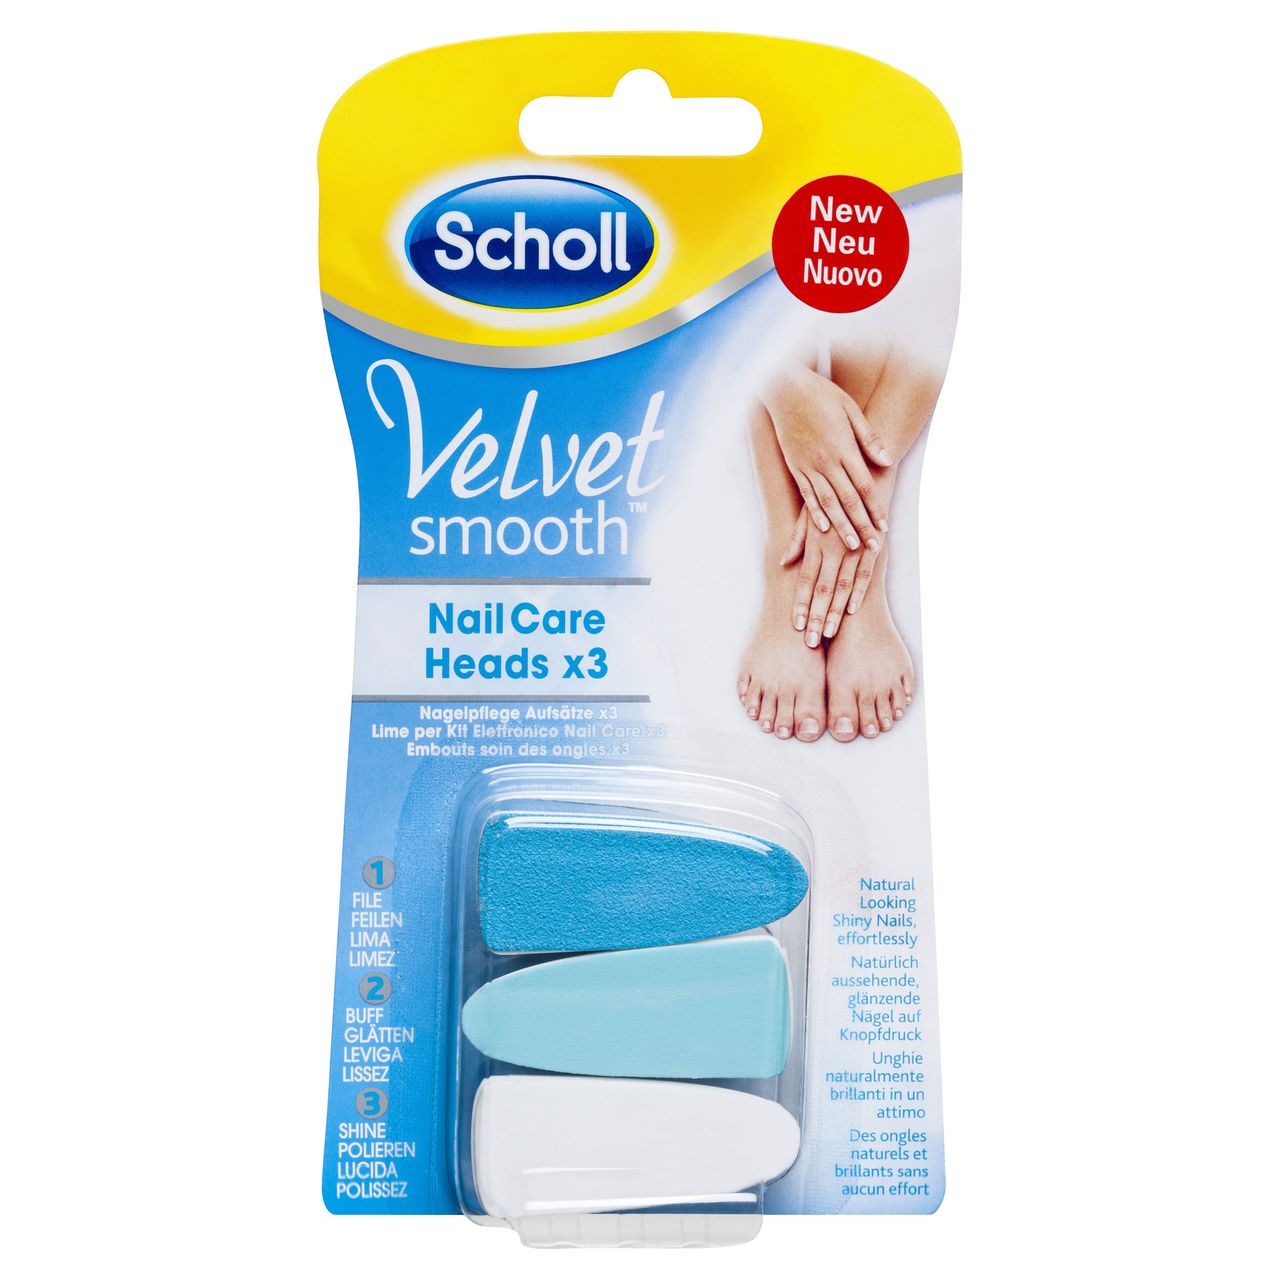 Scholl Velvet Smooth™ Nail Care System Refills